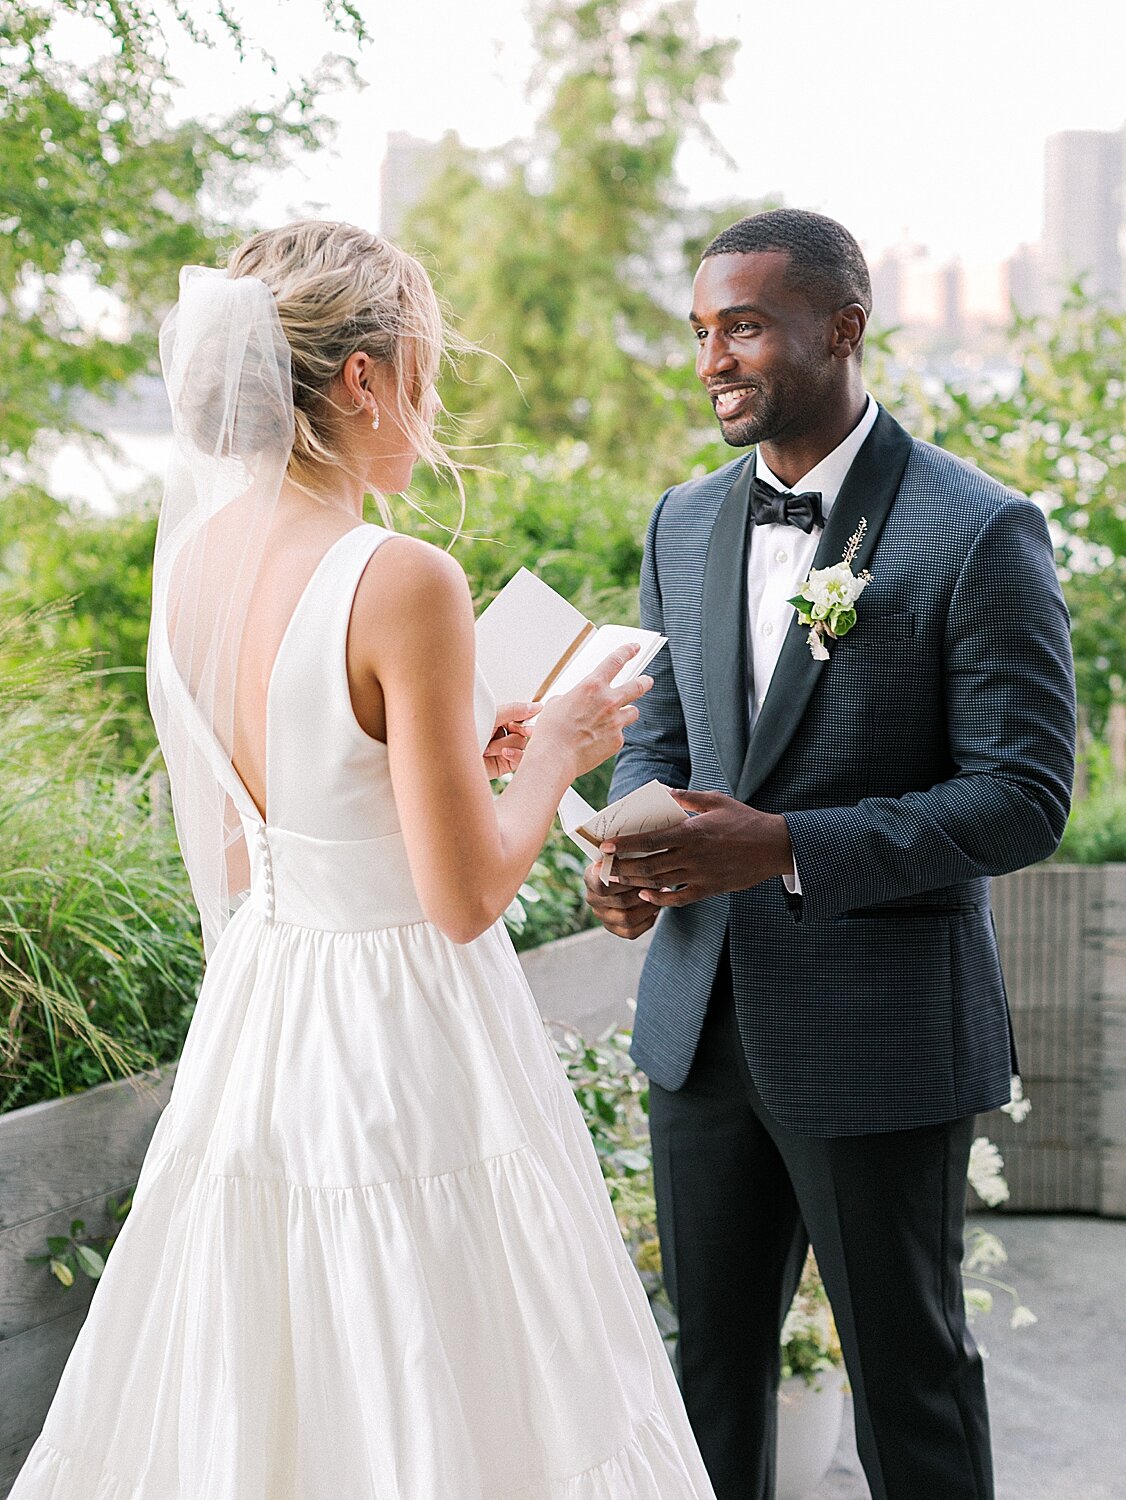 bride and groom read vows during wedding ceremony | Asher Gardner Photography | Intimate Ceremony in DUMBO New York